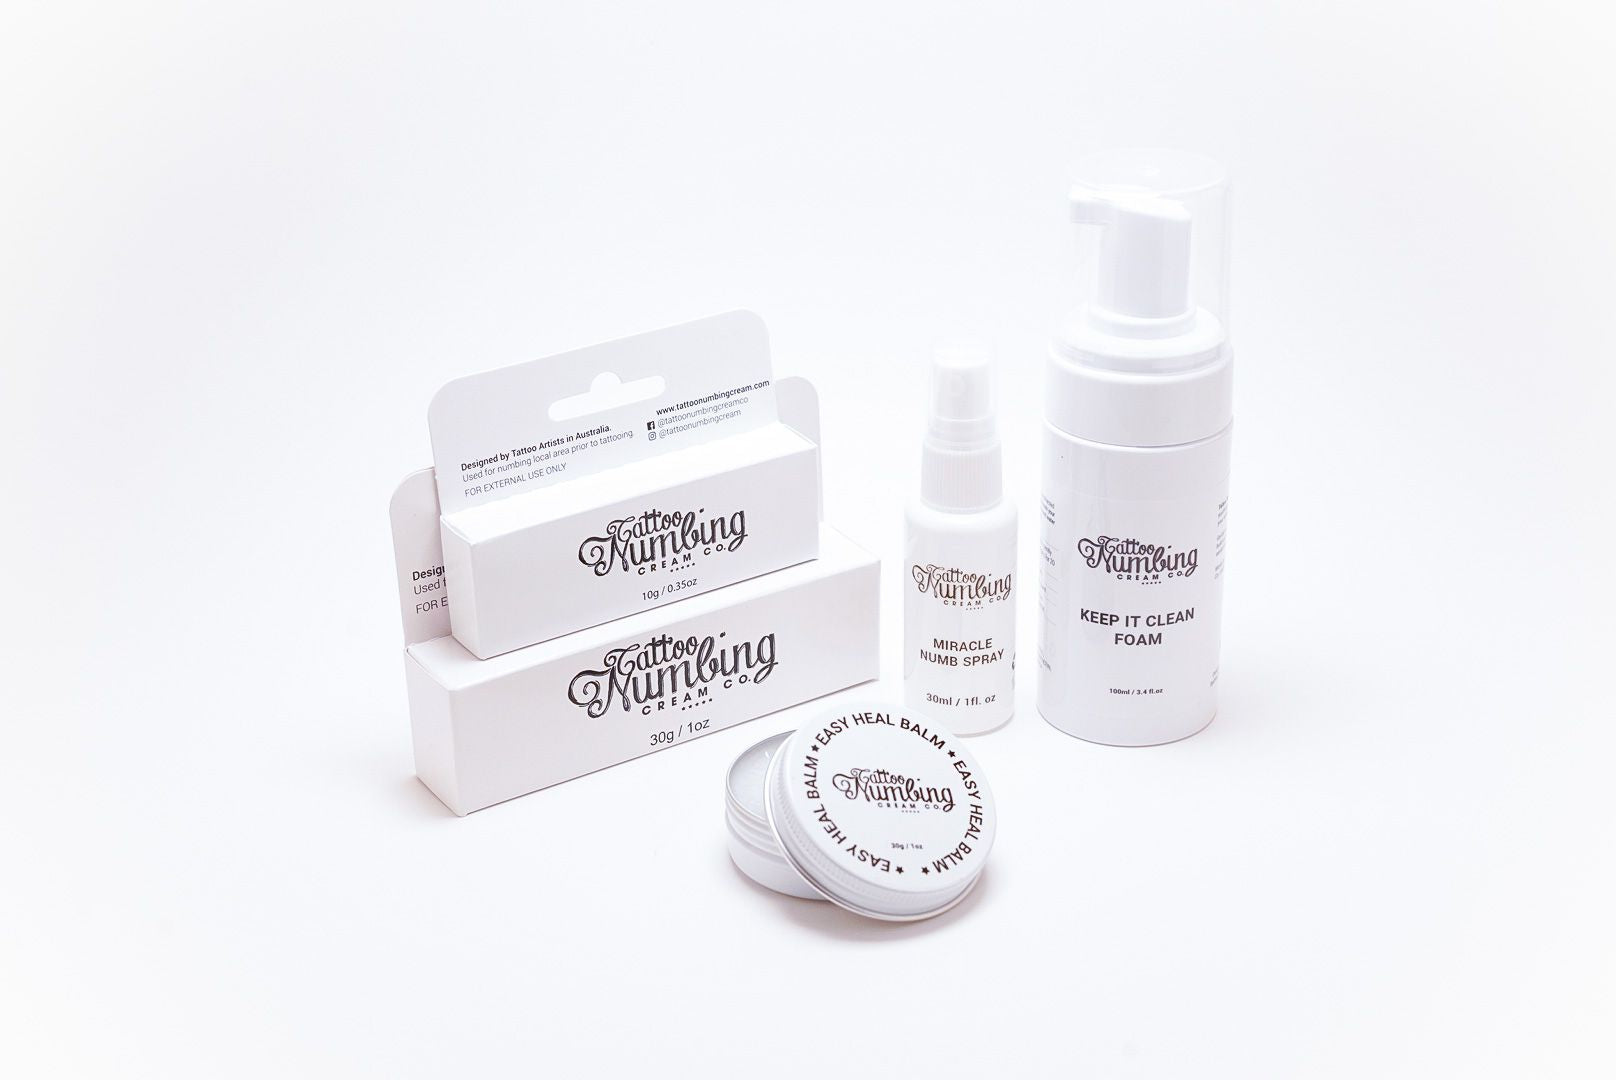 Buy Tattoo Numbing Cream 40g Numbing Cream for Tattooing to Relieve Tattoo  Pain Tattoo Numbing Cream Strong Used for Pain Free Tattoos  All  Cosmetic Piercings Waxing Lip filler  by Samnyte